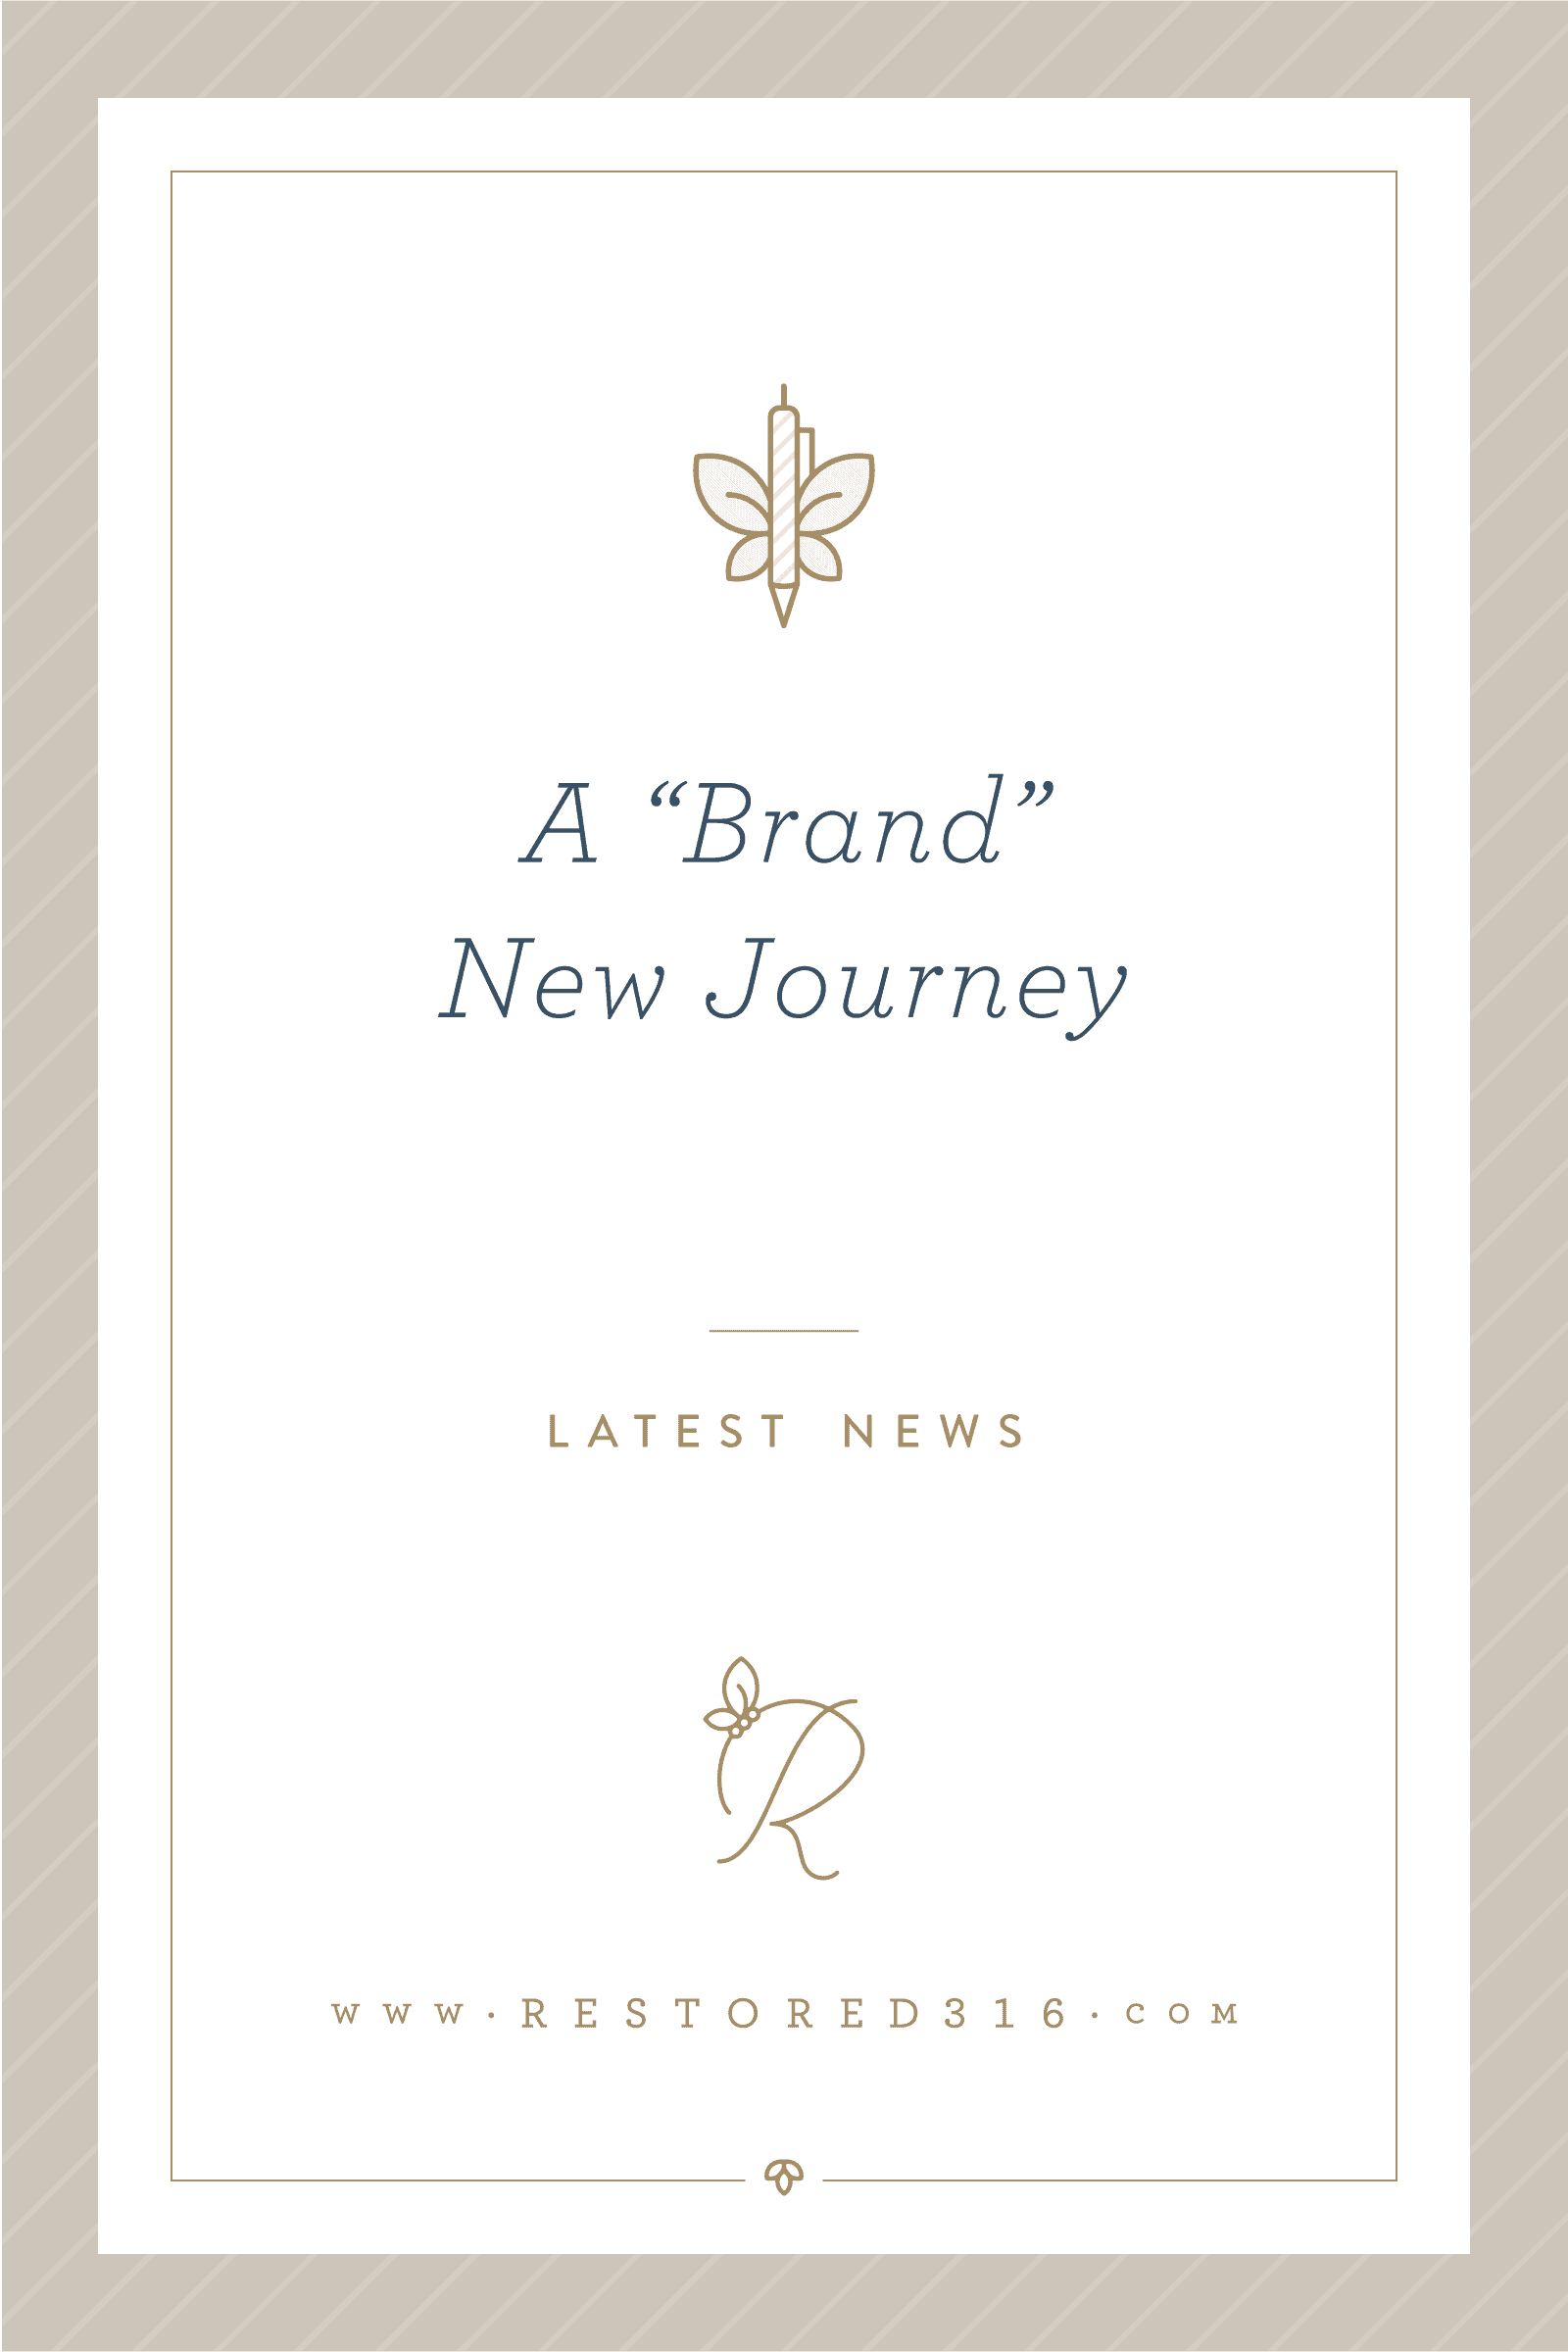 A “Brand” New Journey